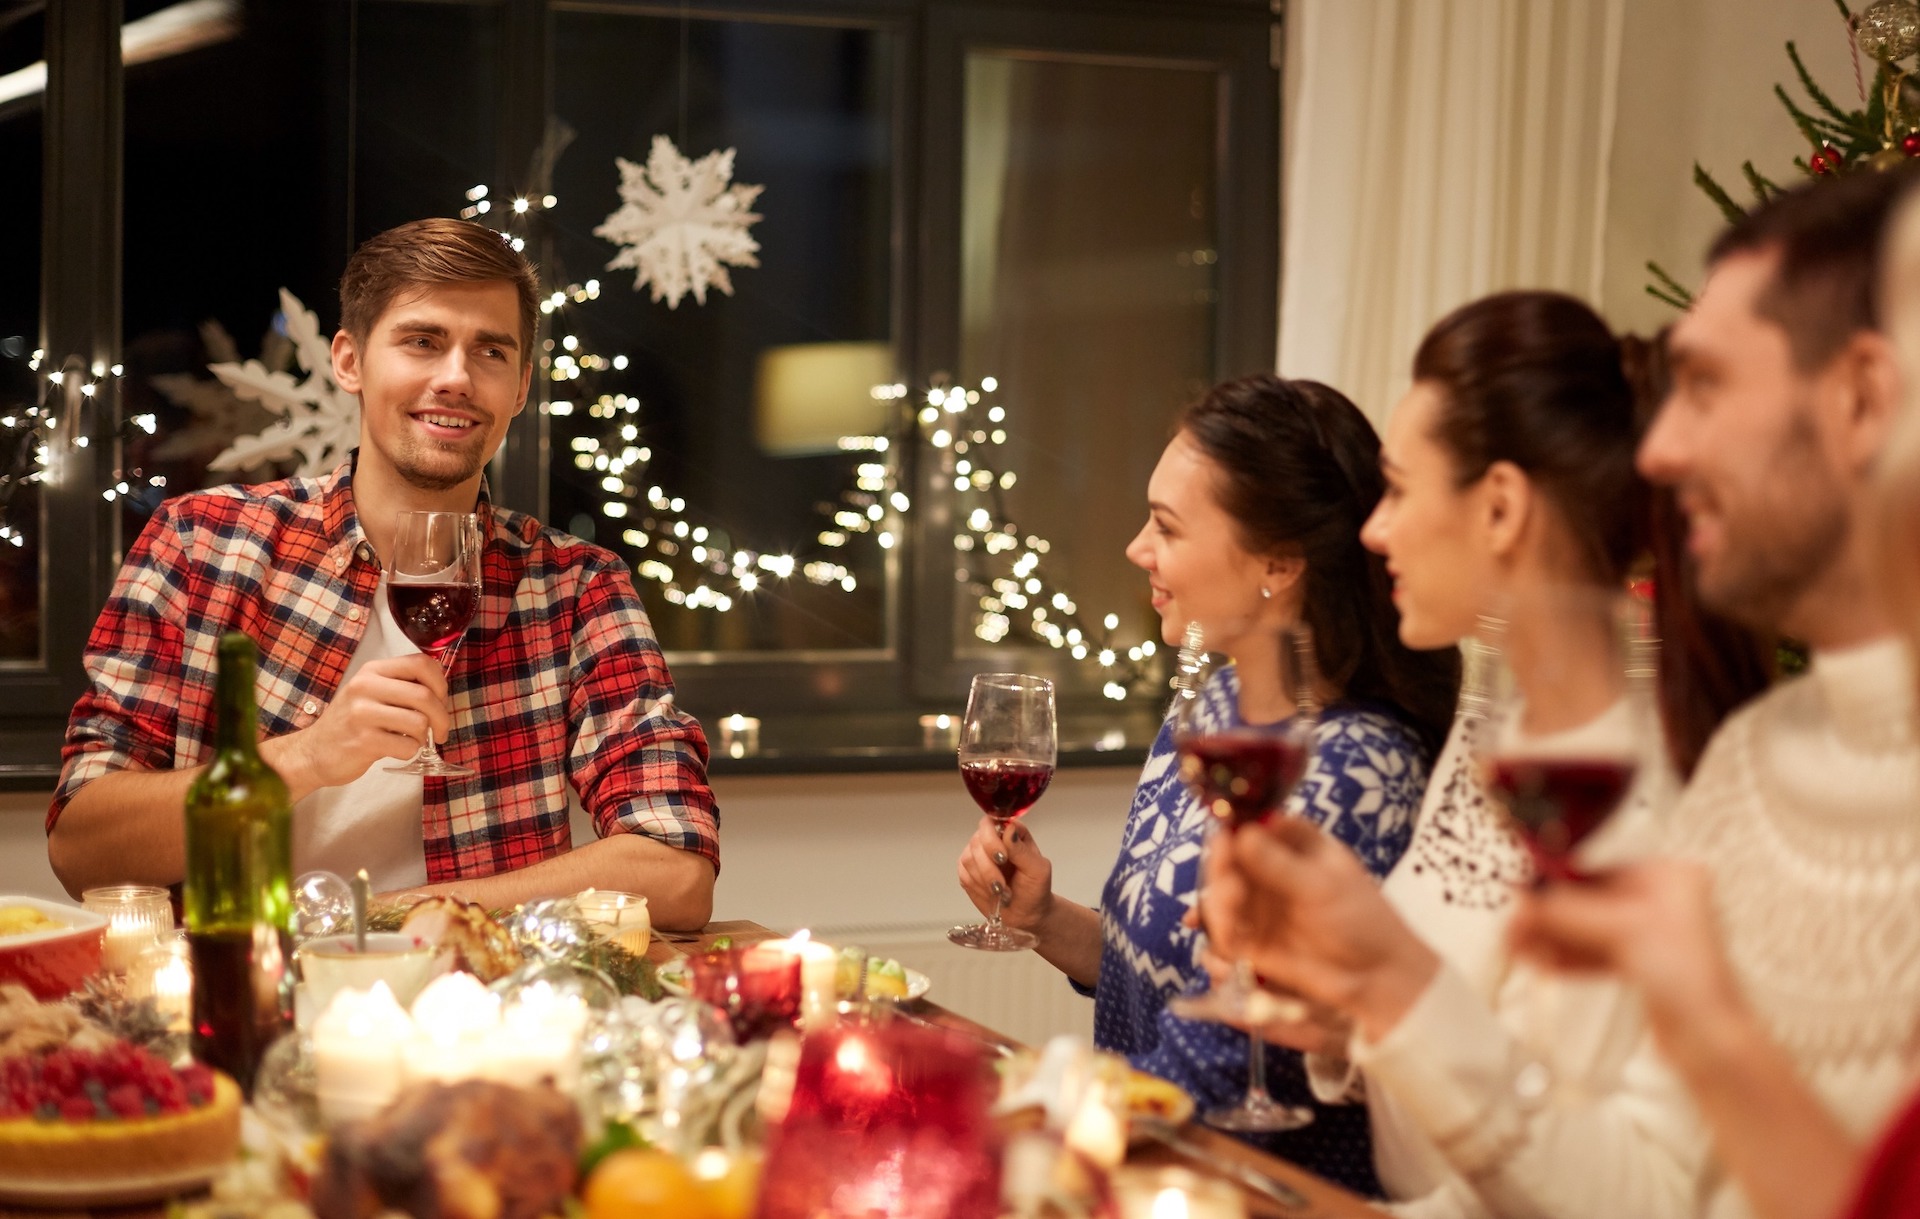 Managing Your Mental Health During the Holiday Season